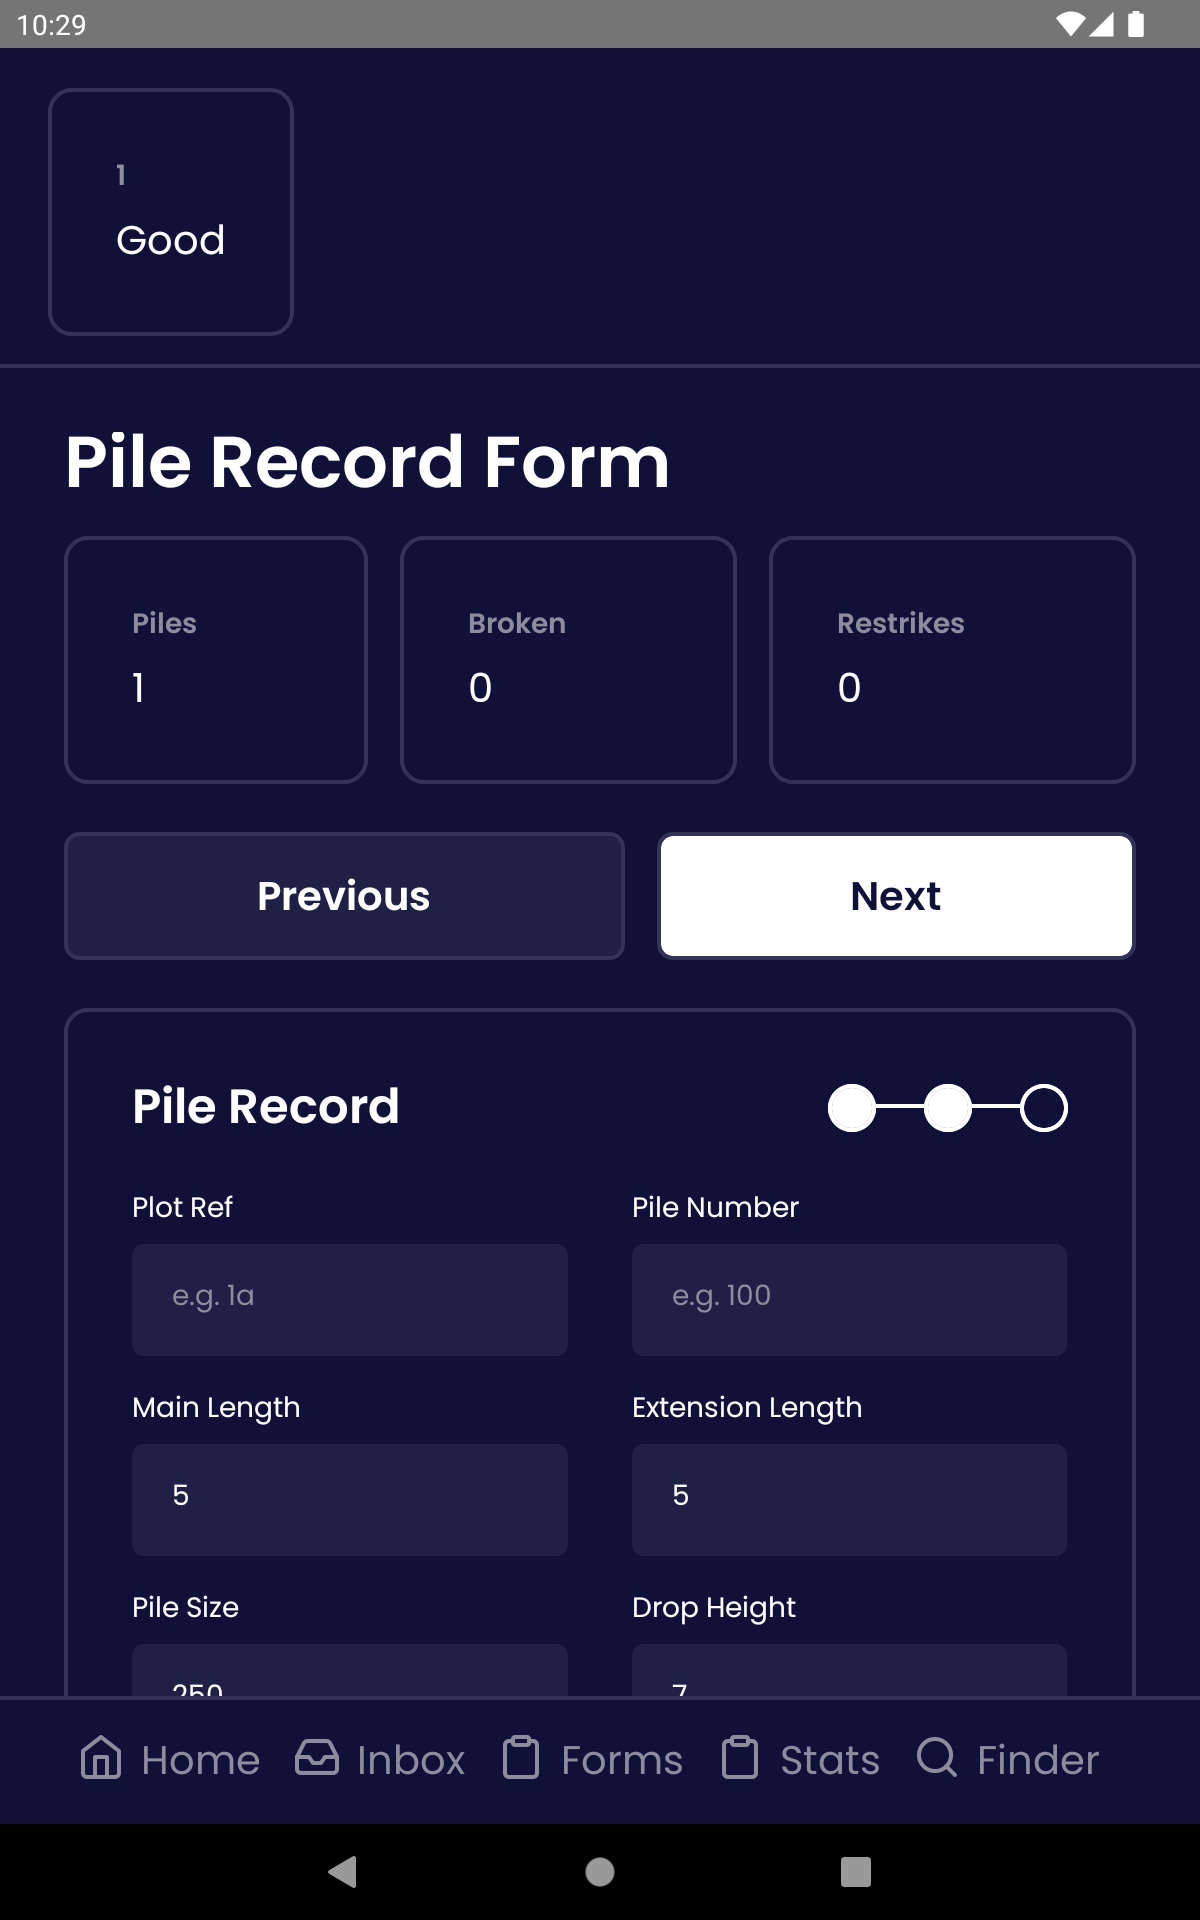 PileRecord-PileSubmitted